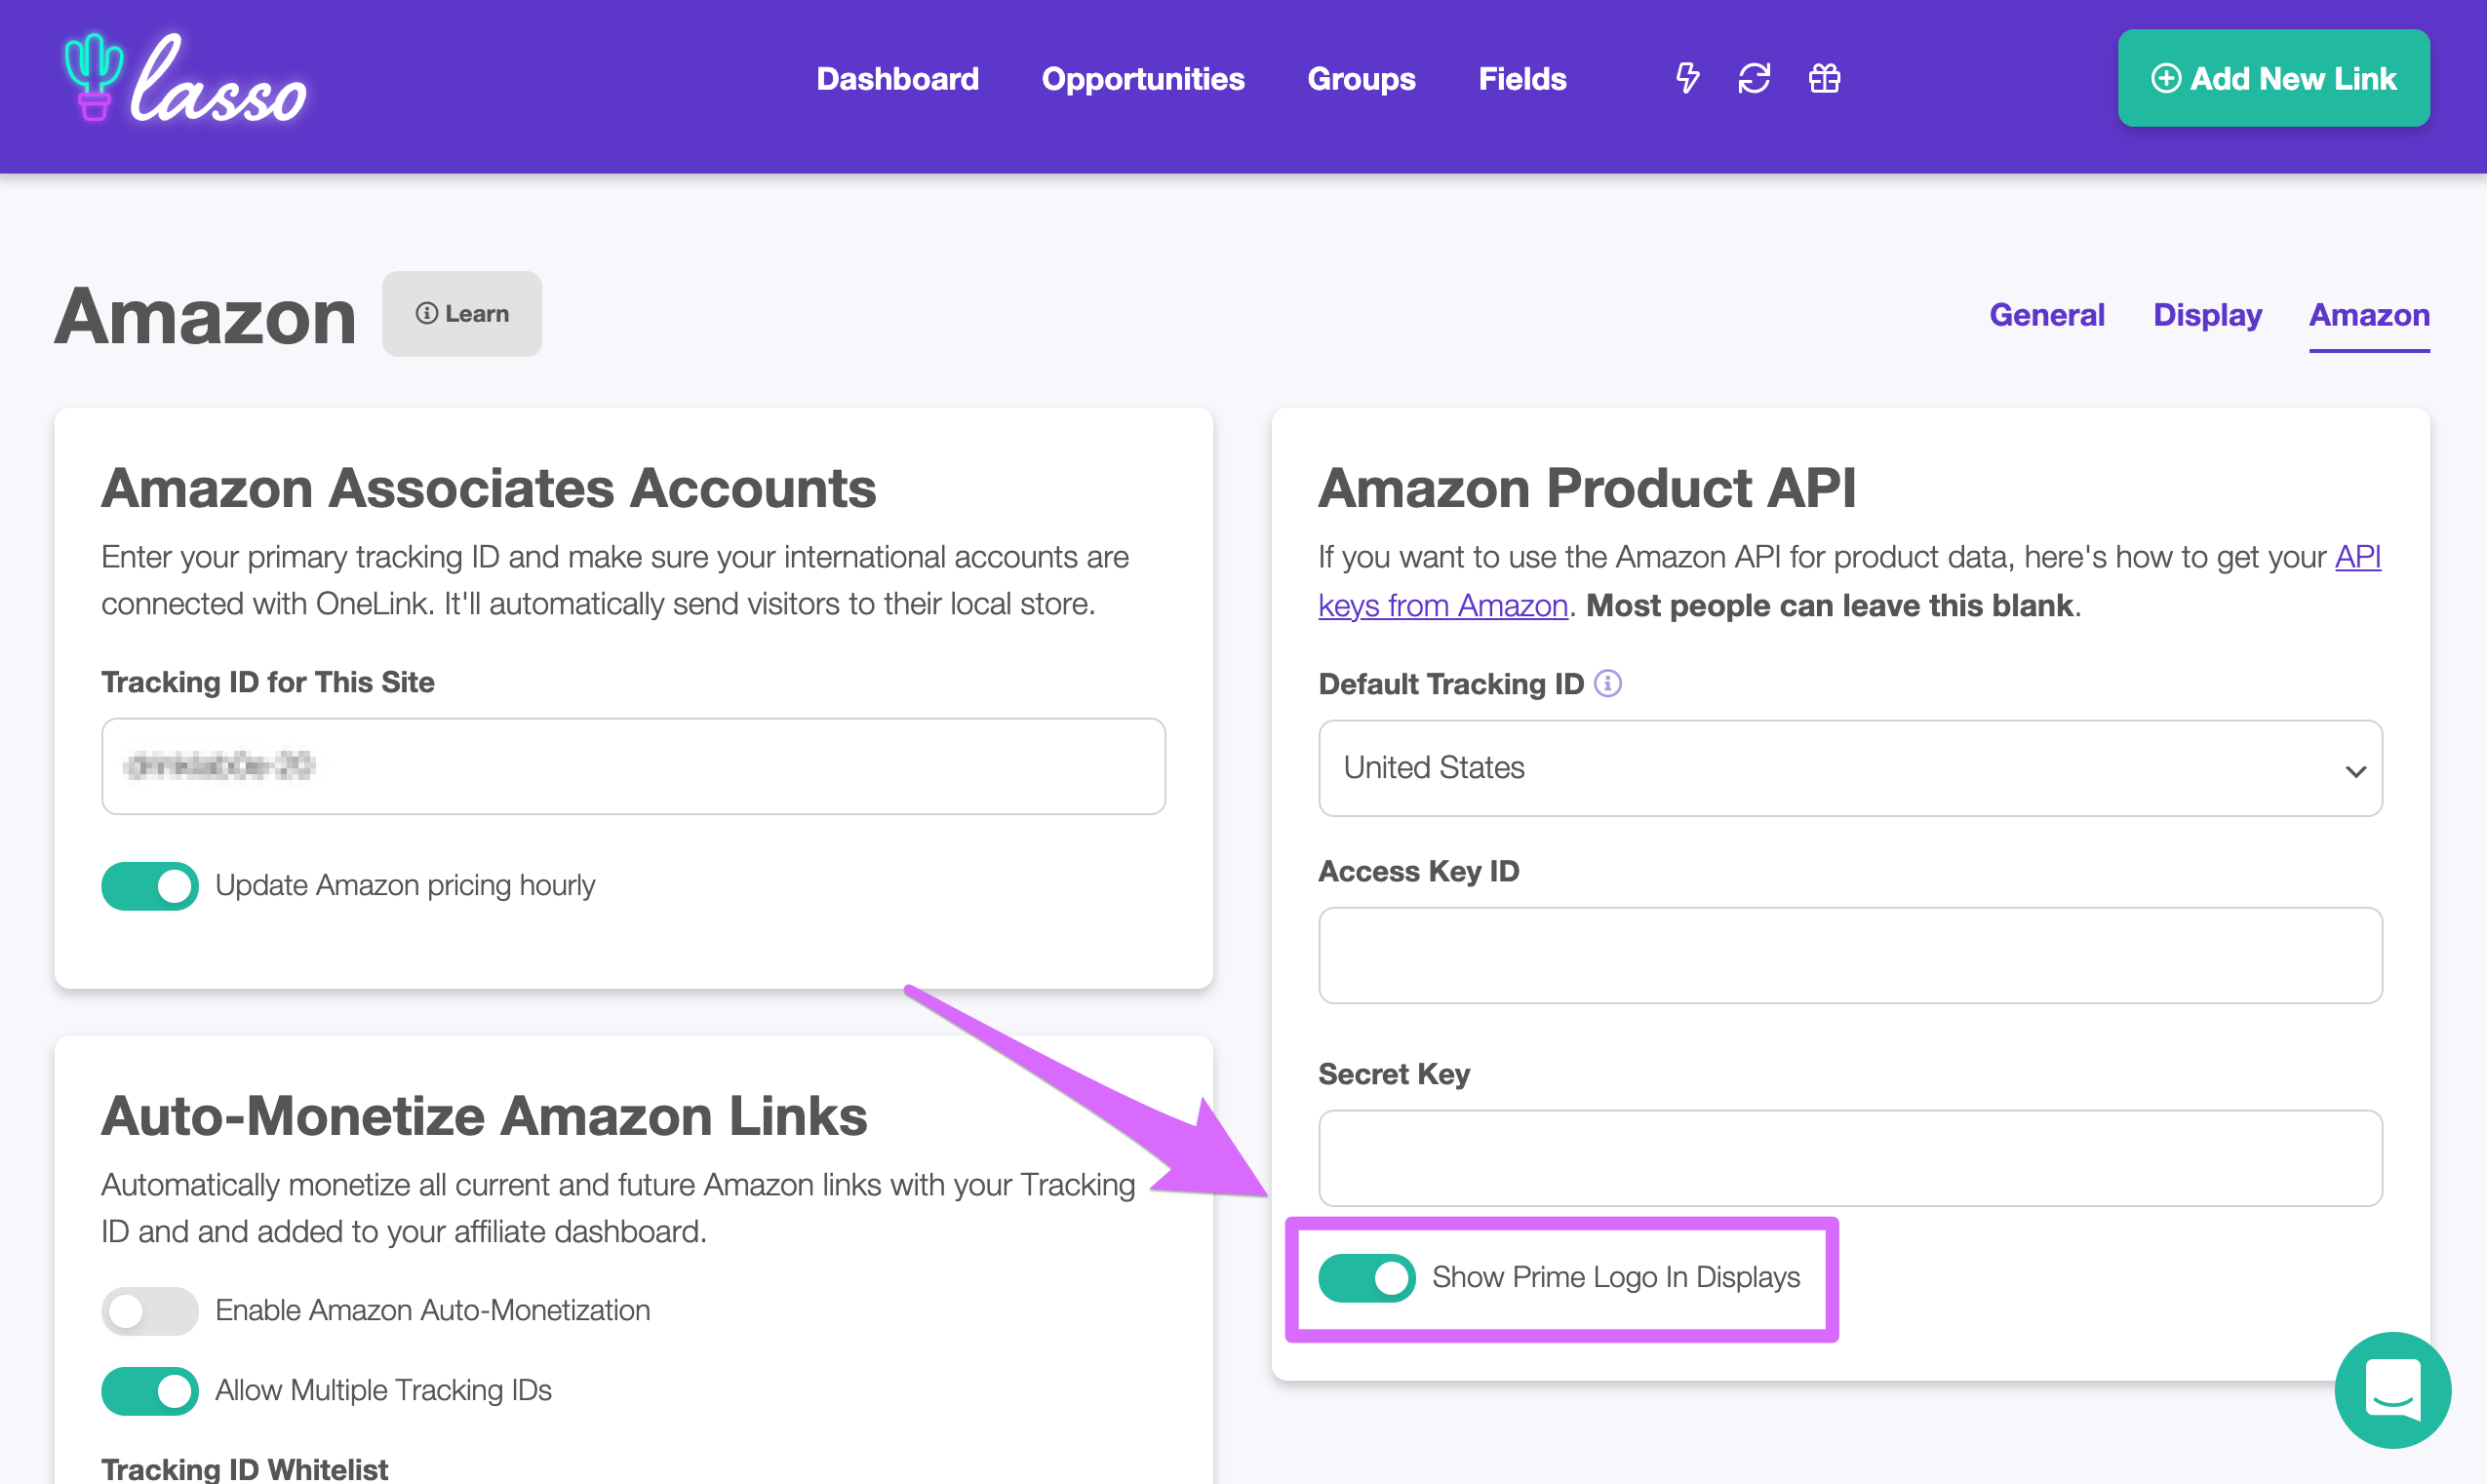 lasso enabling prime logo in displays to improve amazon affiliate conversion rate